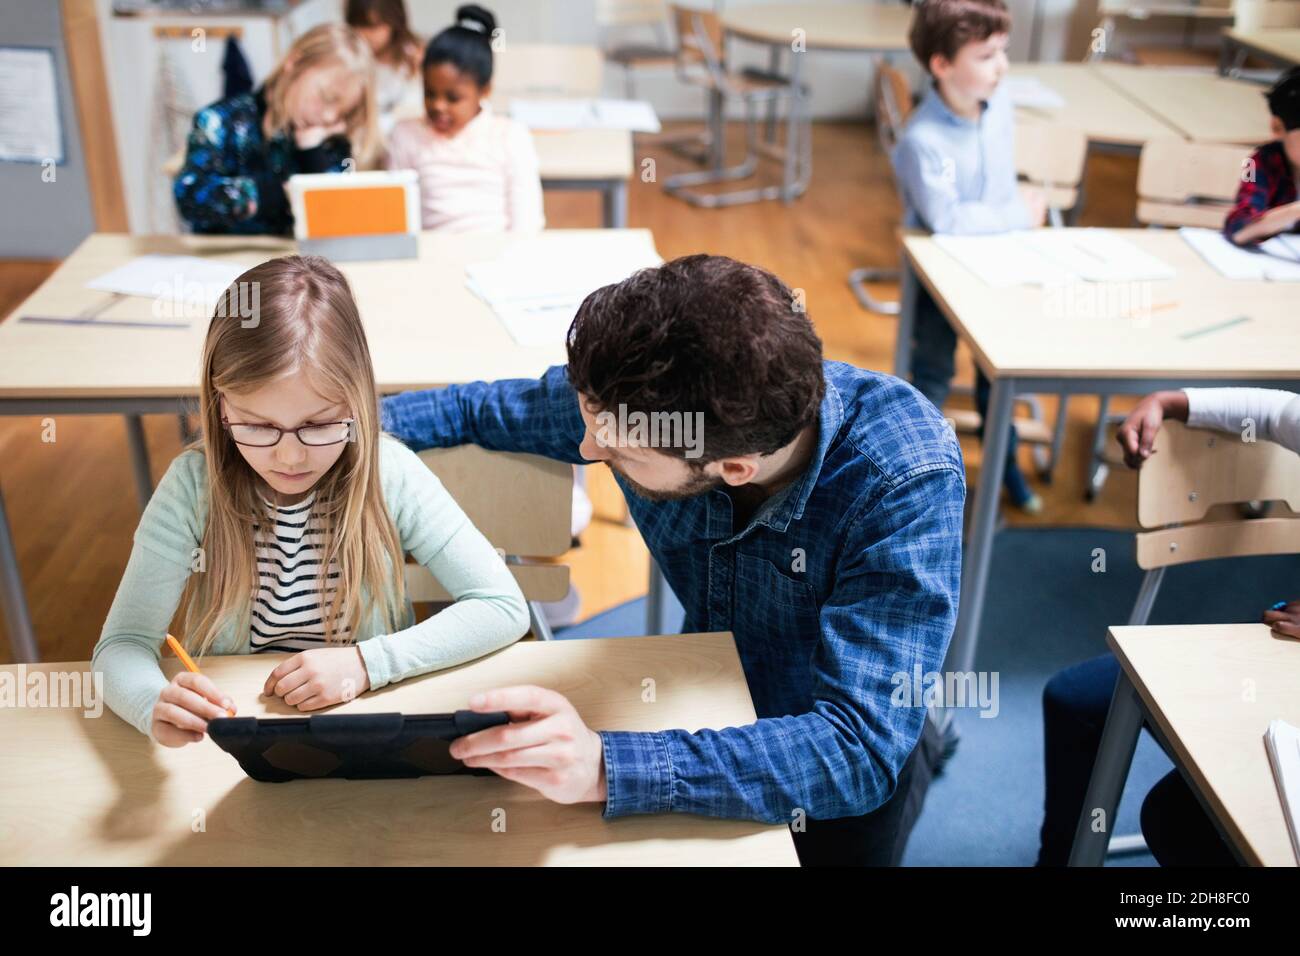 High angle view of teacher assisting female student while using digital tablet in classroom Stock Photo